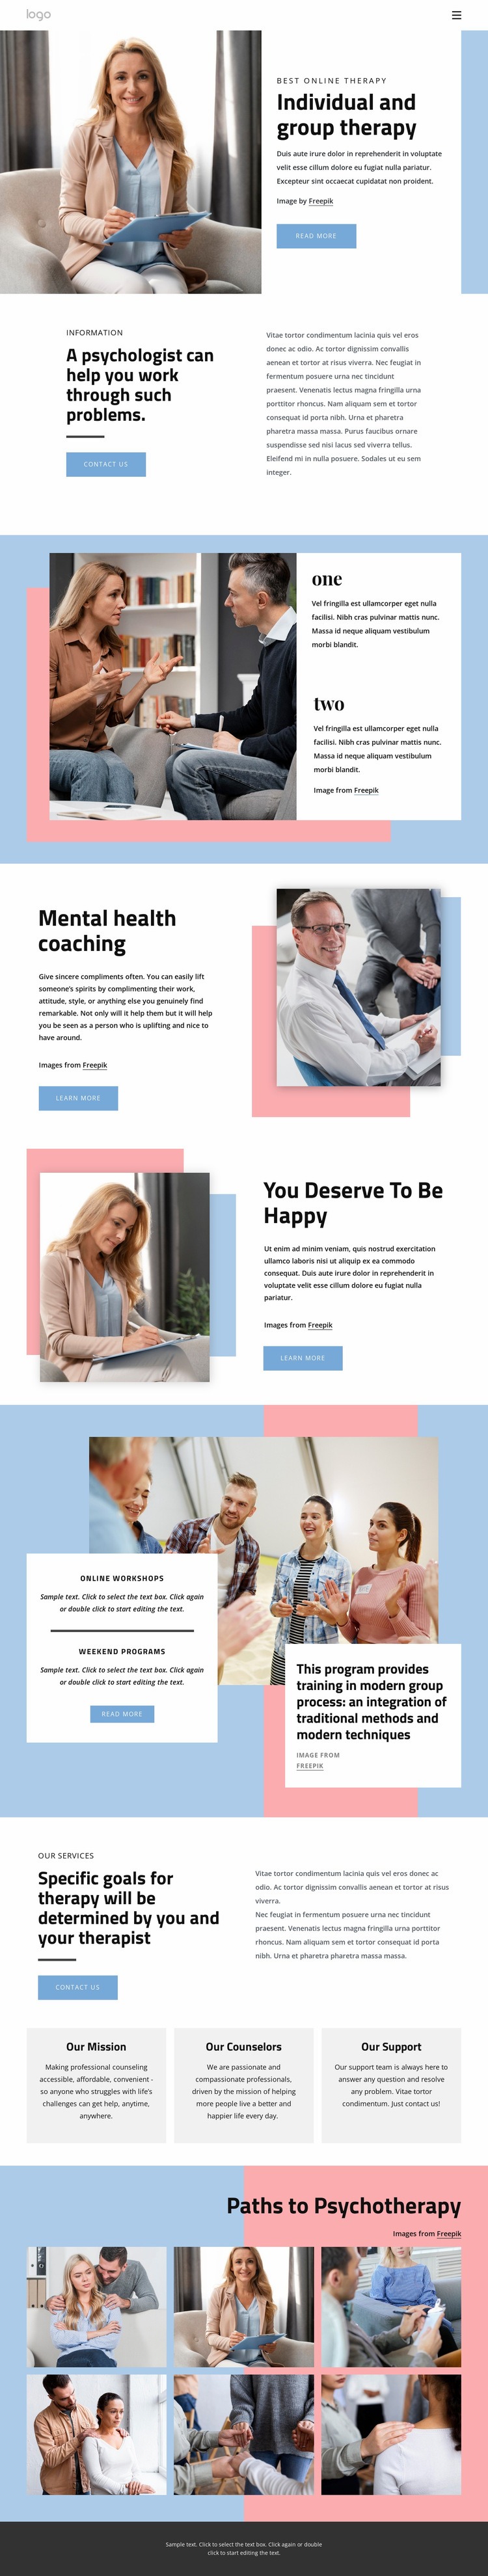 Undividual and group therapy Webflow Template Alternative